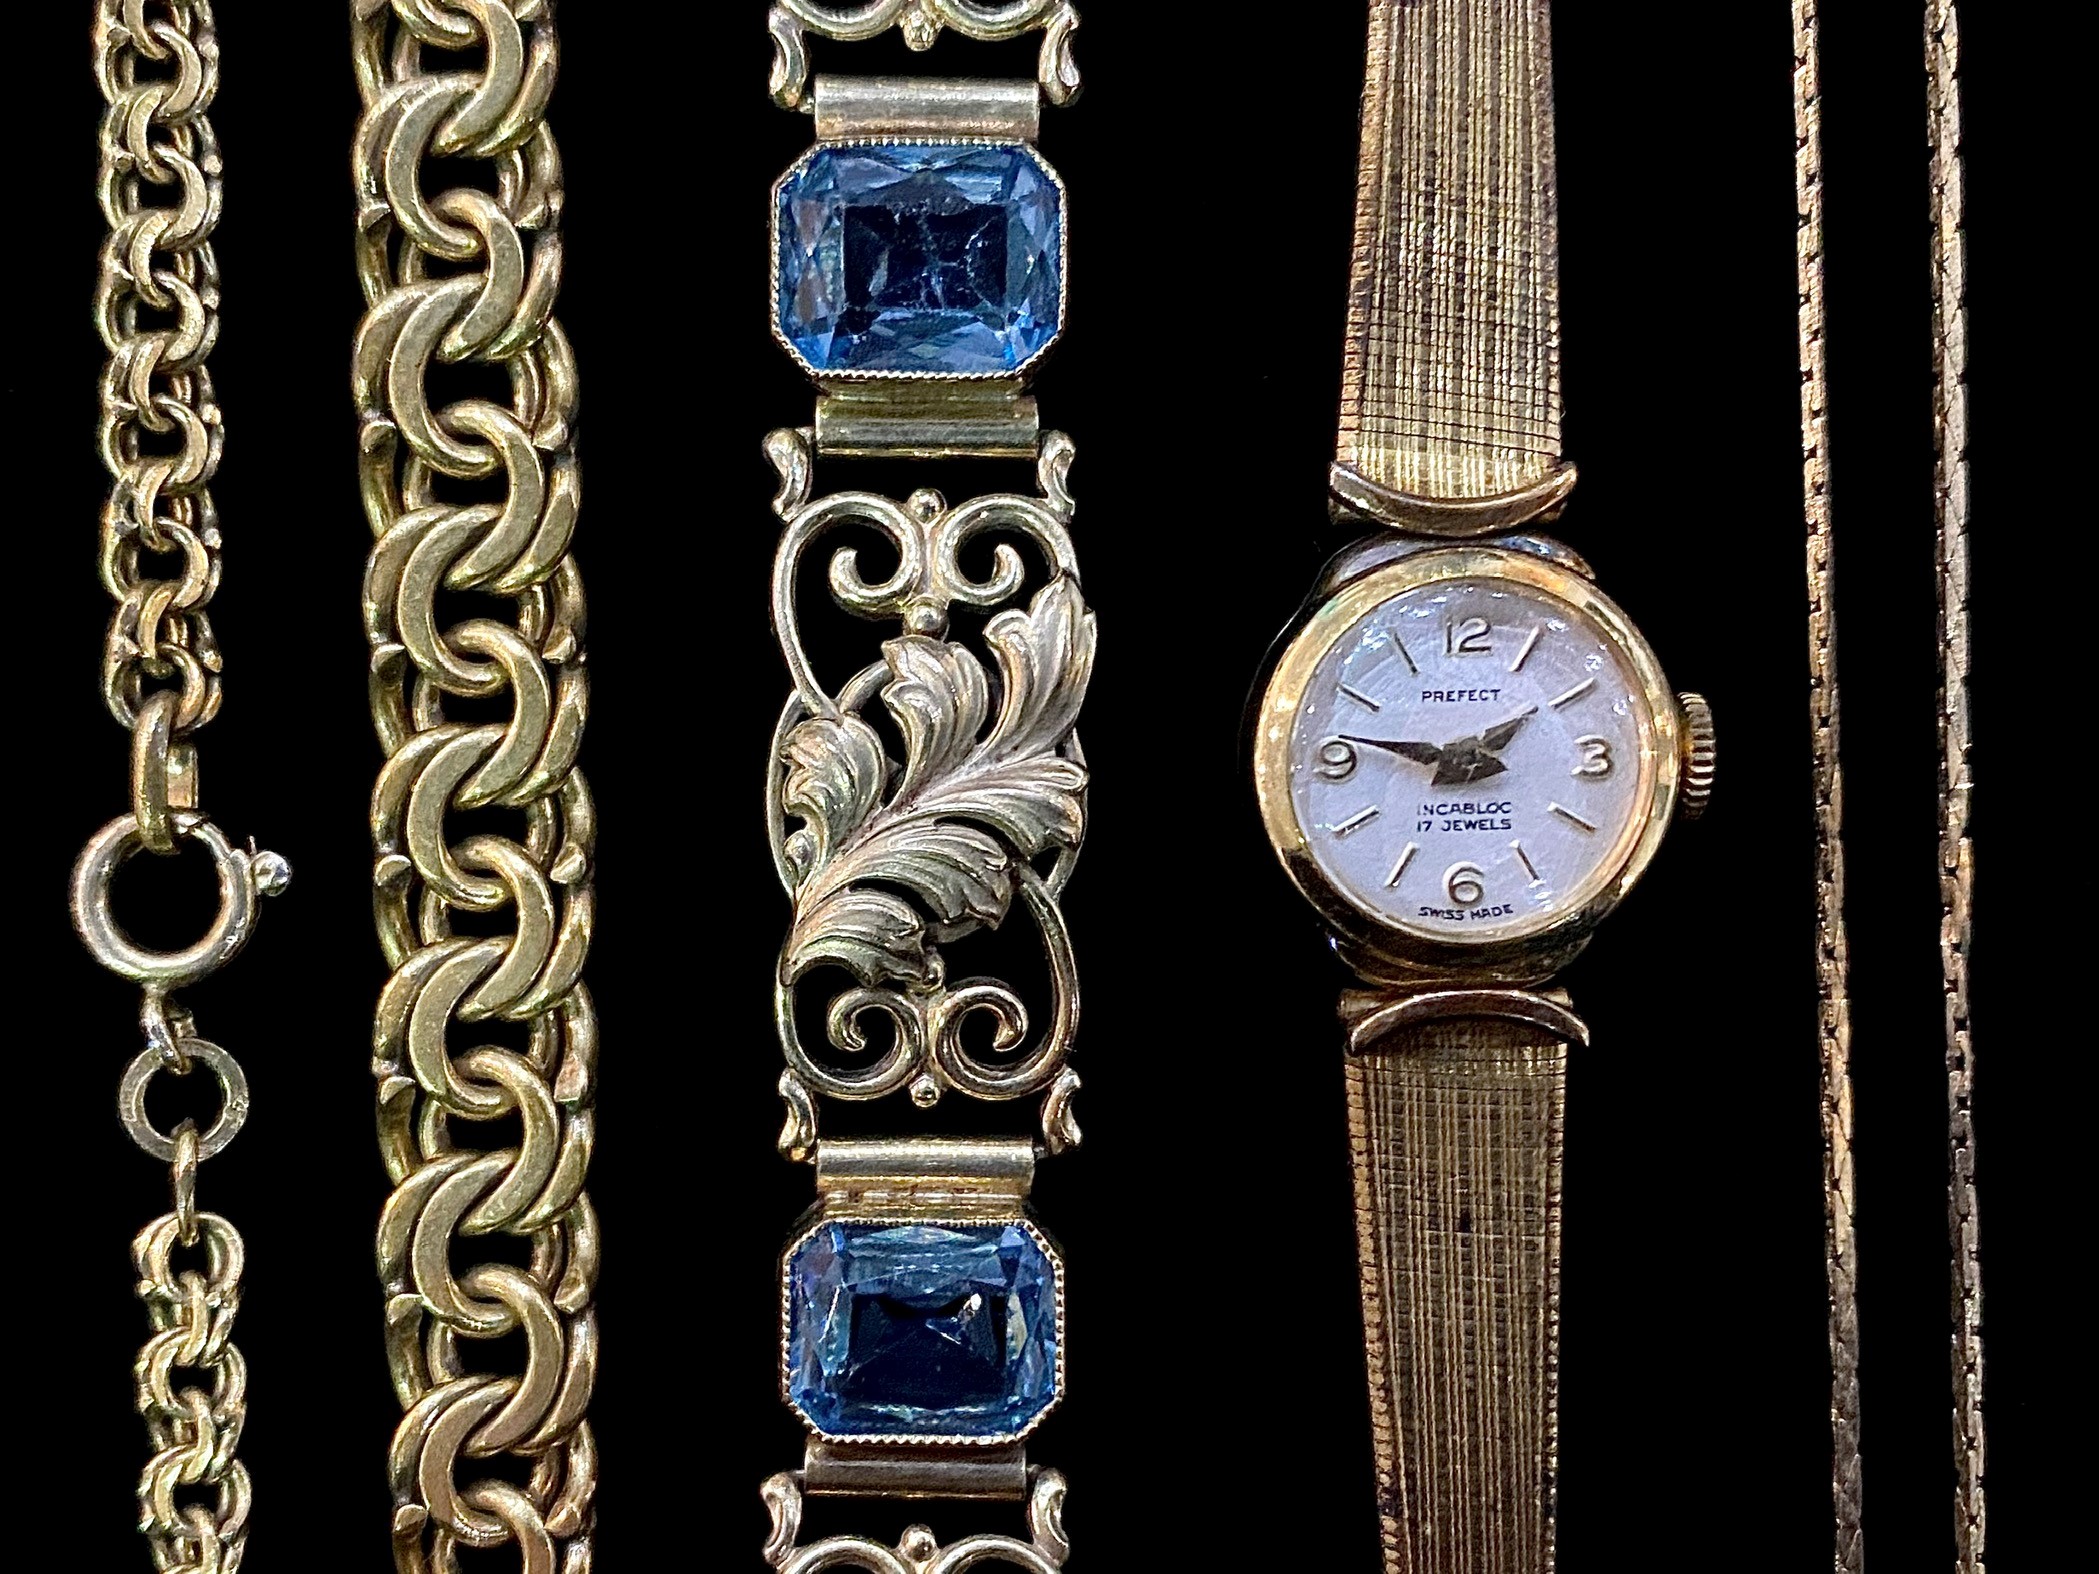 Collection of Rolled Gold Jewellery to include bangles, lockets, necklace, and tie clips. - Image 3 of 4